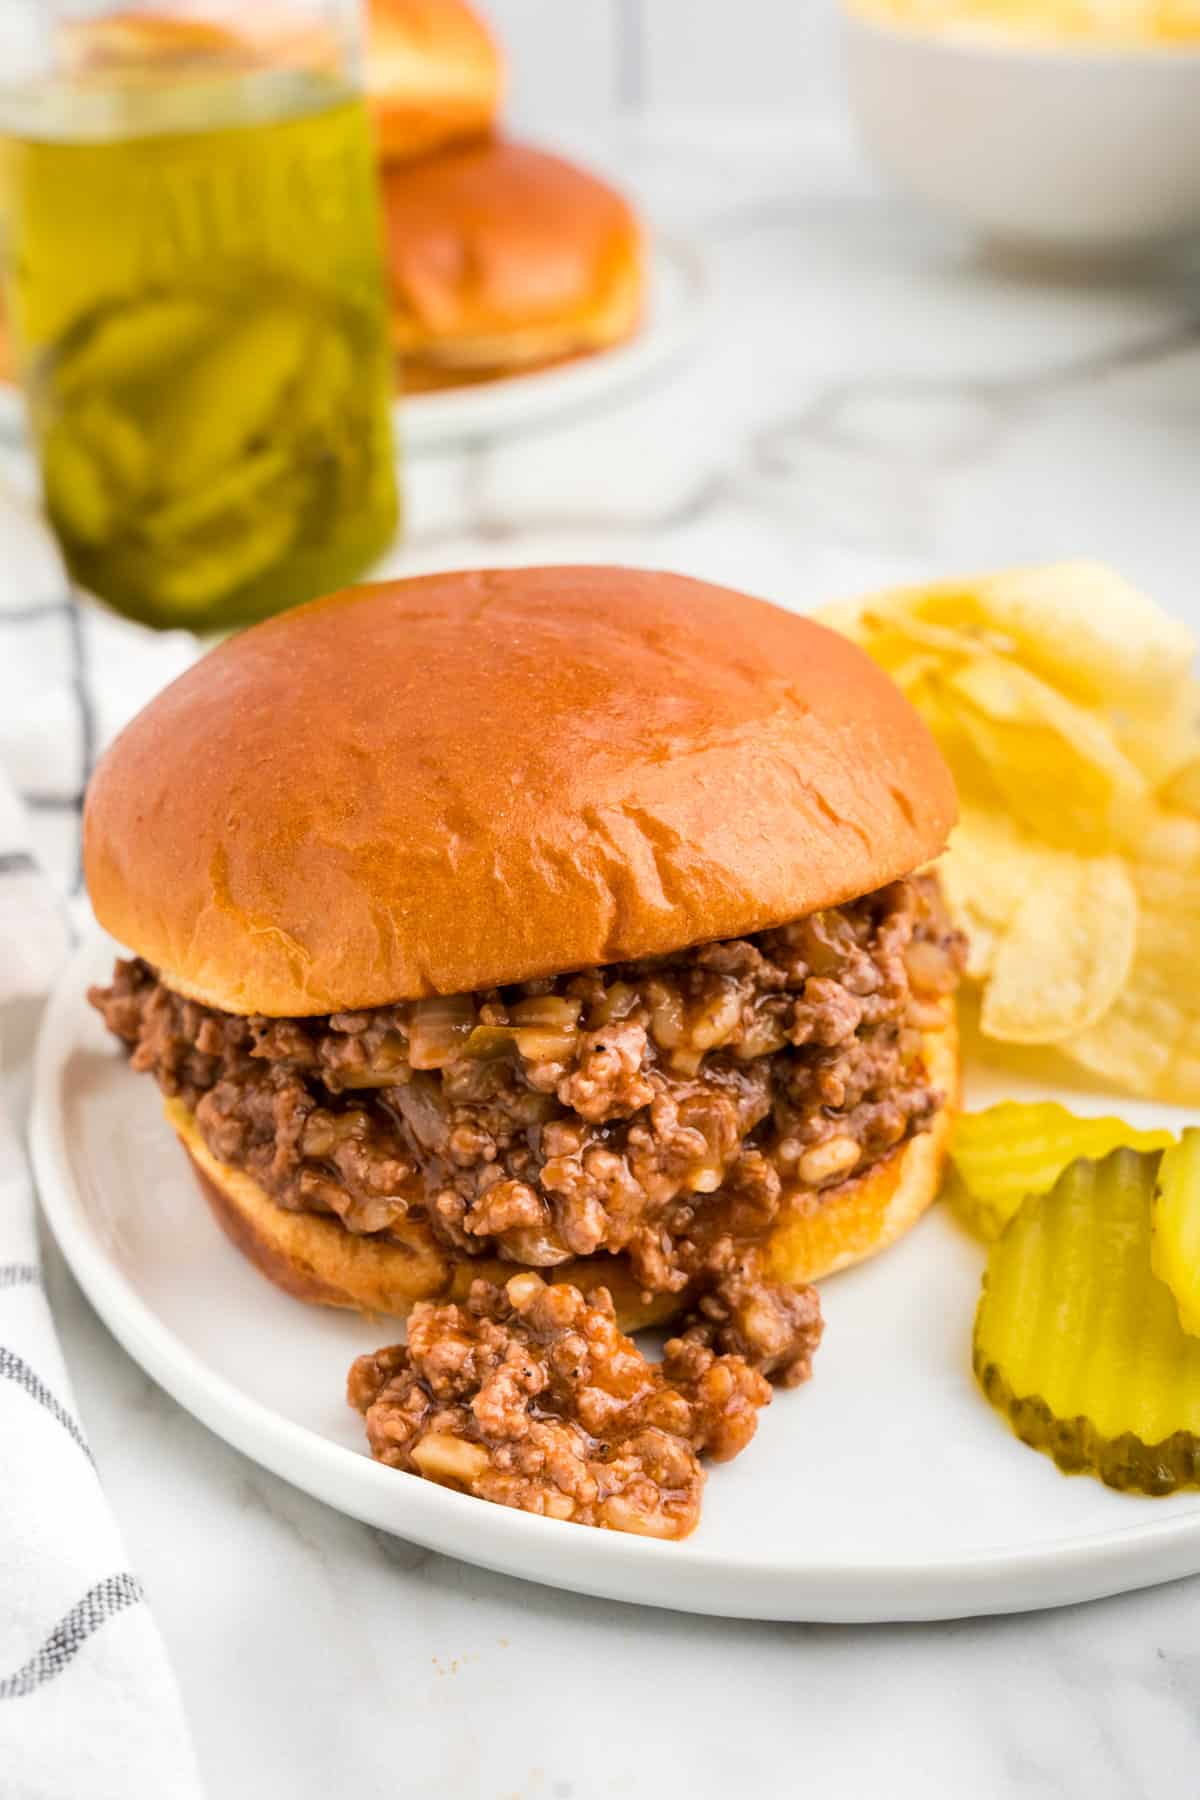 Large Batch Sloppy Joes recipe with meat on bun with chips and pickles on the side